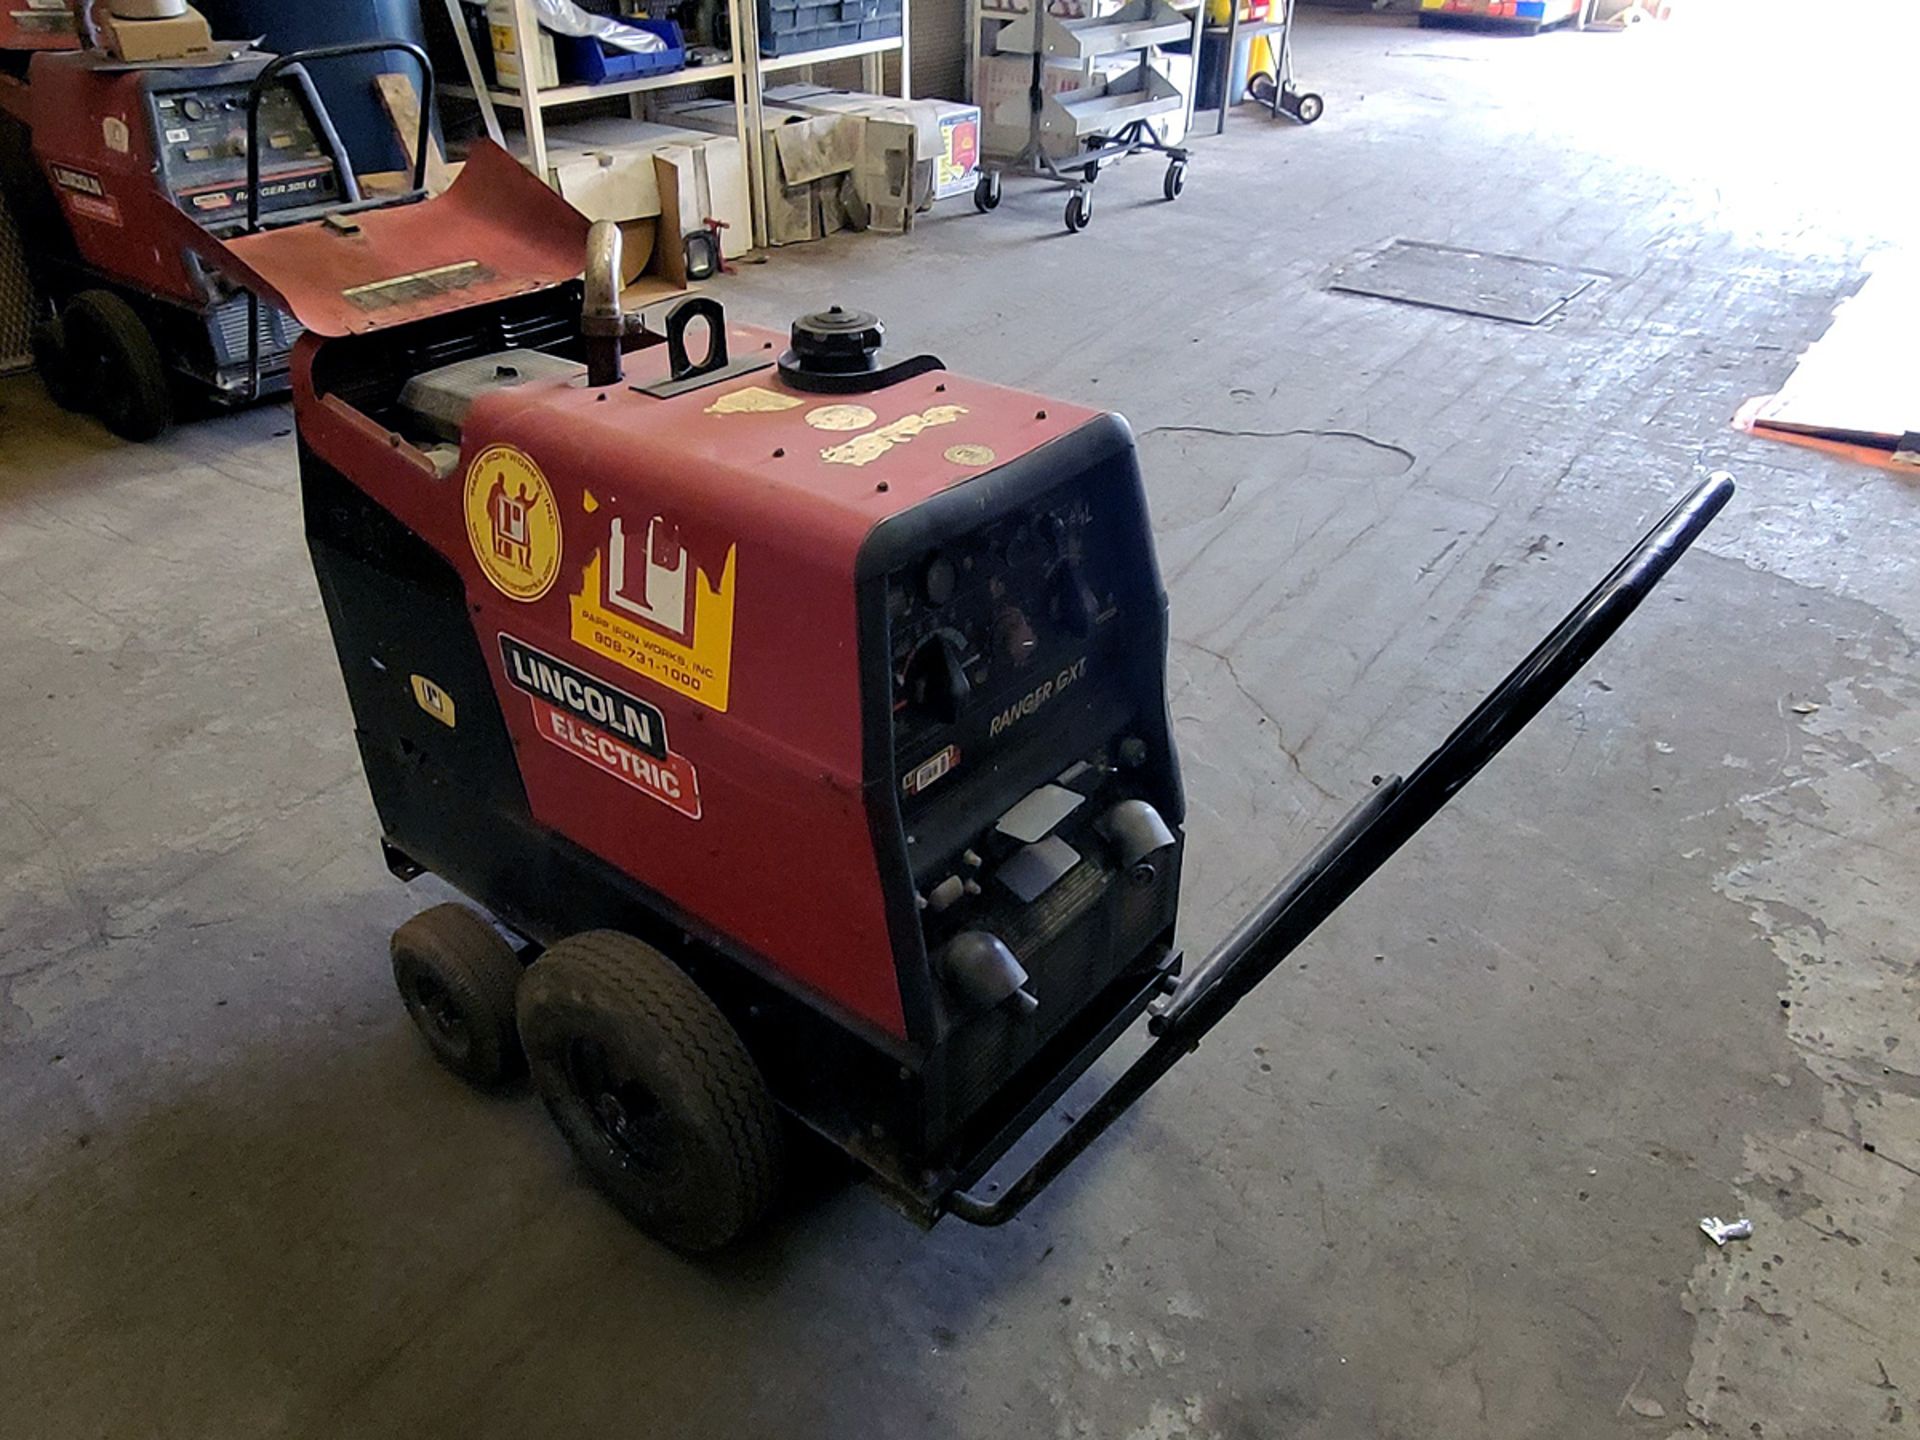 Lincoln Ranger GXT Engine Driven Welder Mounted on Portable Cart